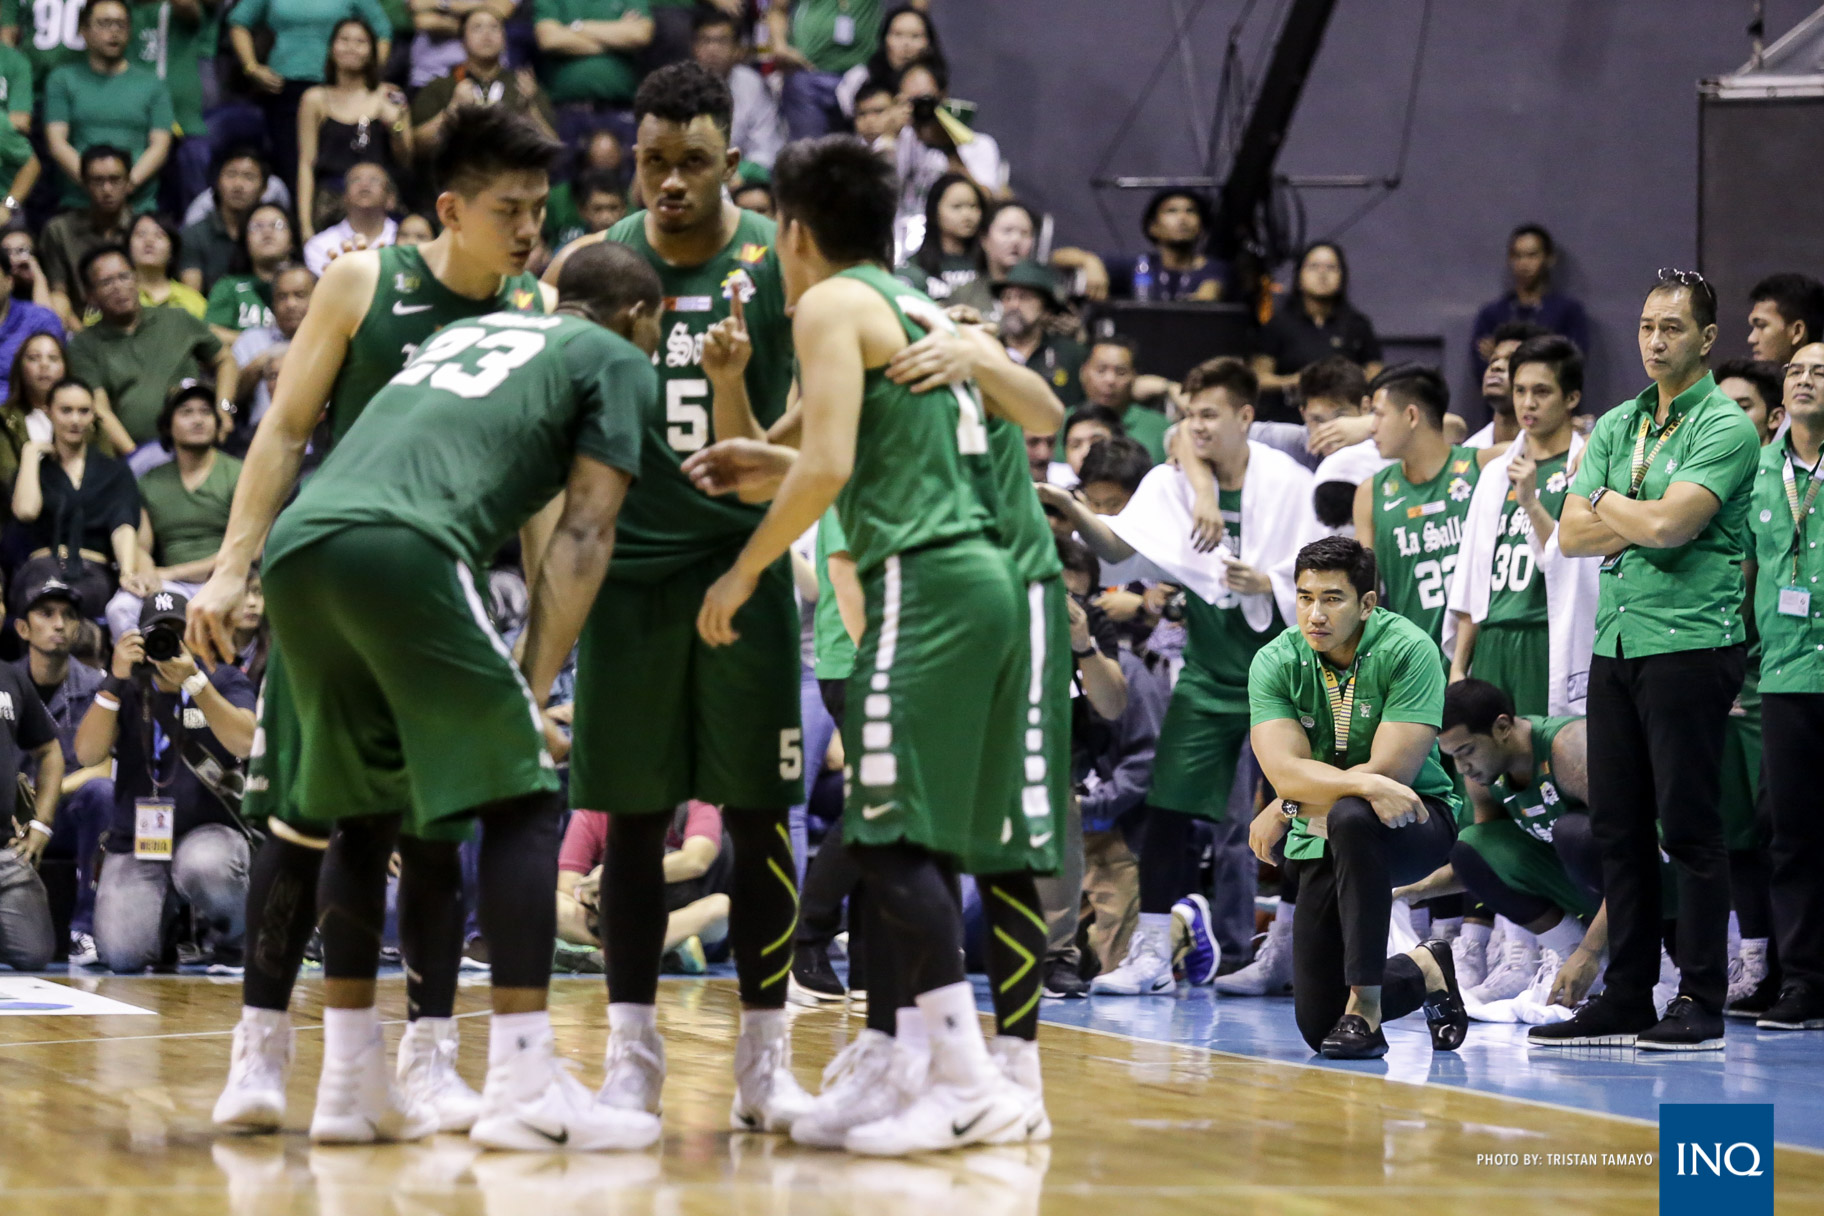 Ben Mbala (23), Jeron Teng and the rest of the Archers on the court plan an offensive play as coach Aldin Ayo (kneeling at right) looks on. “We all have the roles and a game plan to play as a team,” says Mbala. Photo by Tristan Tamayo/INQUIRER.net